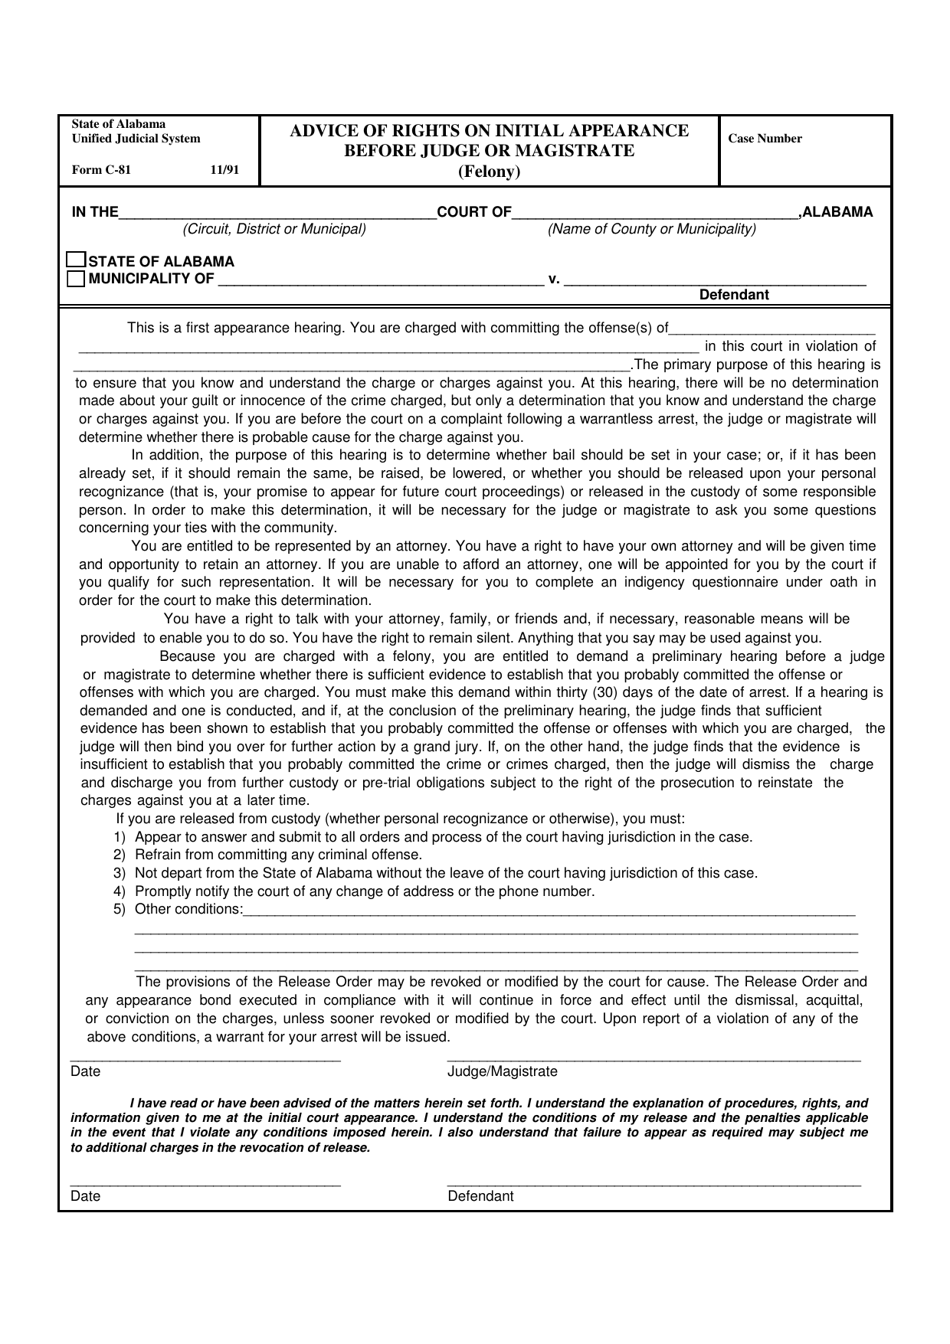 Form C-81 Advice of Rights on Initial Appearance Before Judge or Magistrate (Felony) - Alabama, Page 1